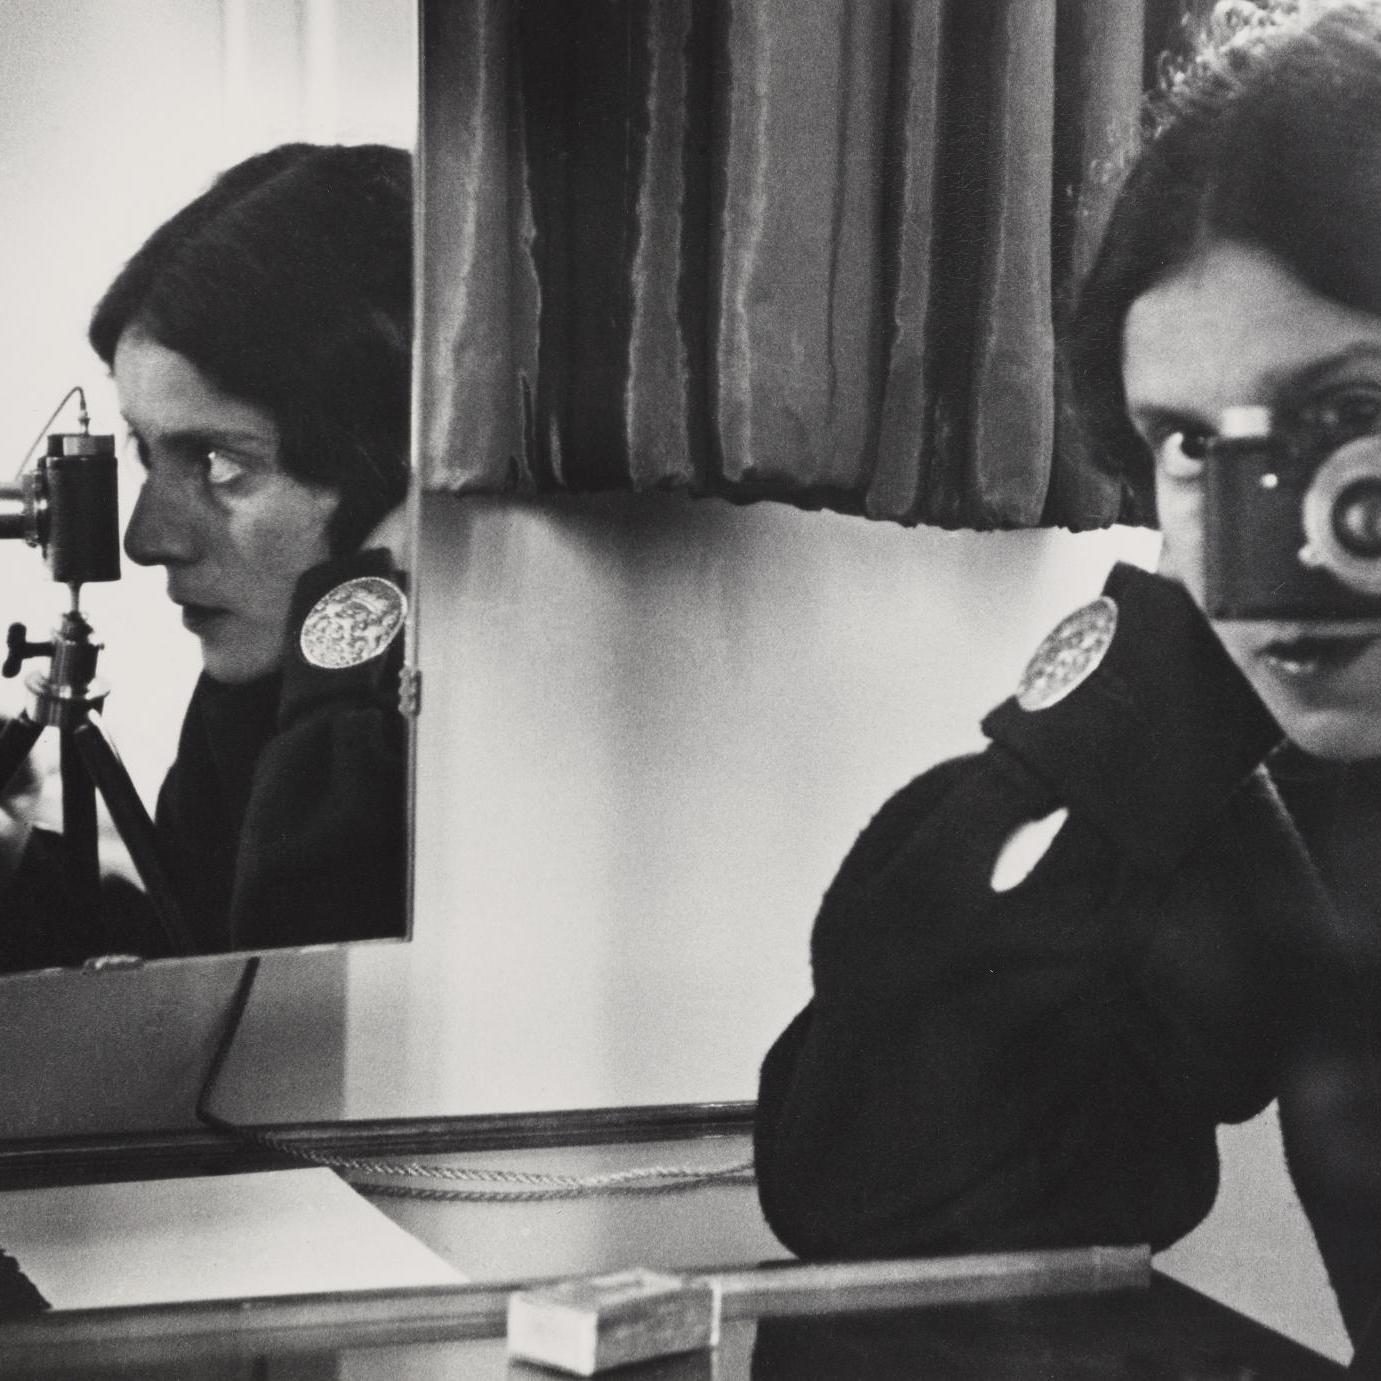 The New Woman Behind the Camera - Exhibitions